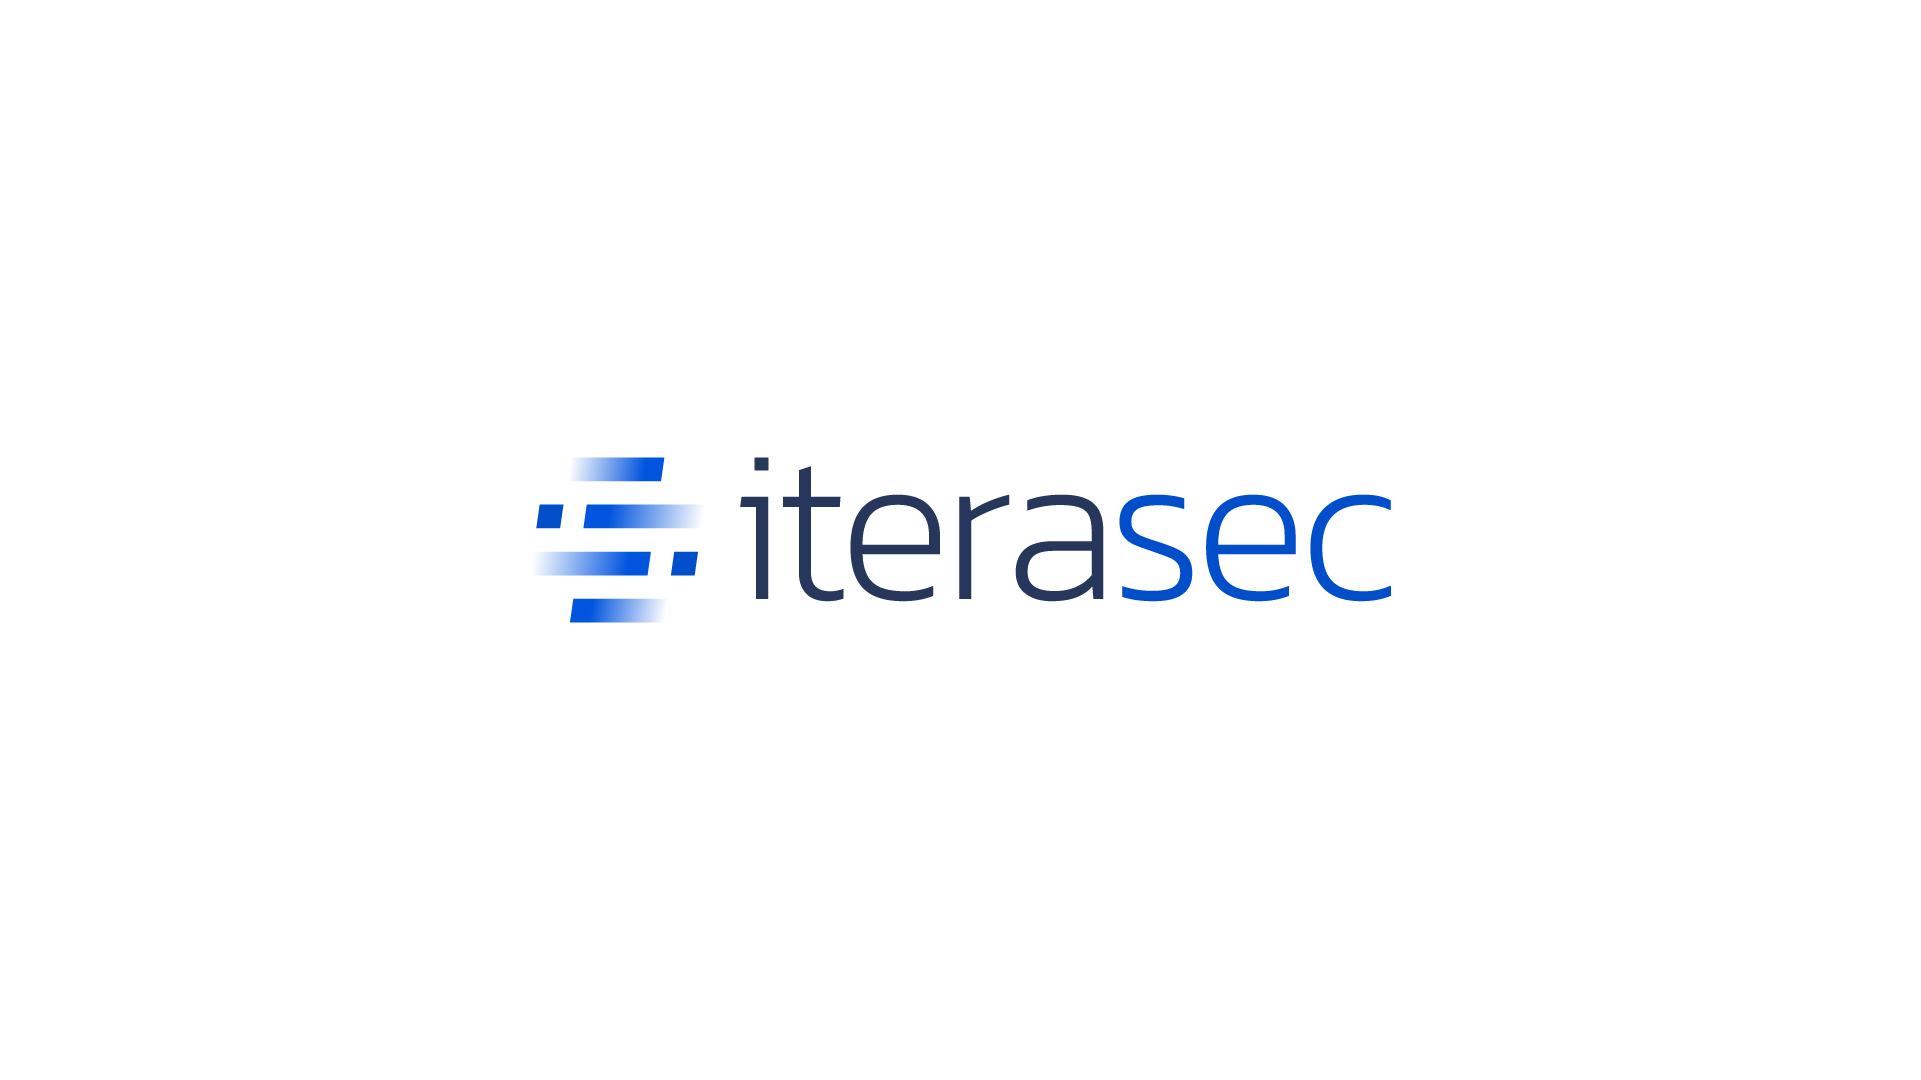 iterasec - Security Services logo, abstract shape with multiple letters 'i' and letter 'S' in negative space, symbolizing intricate and secure services